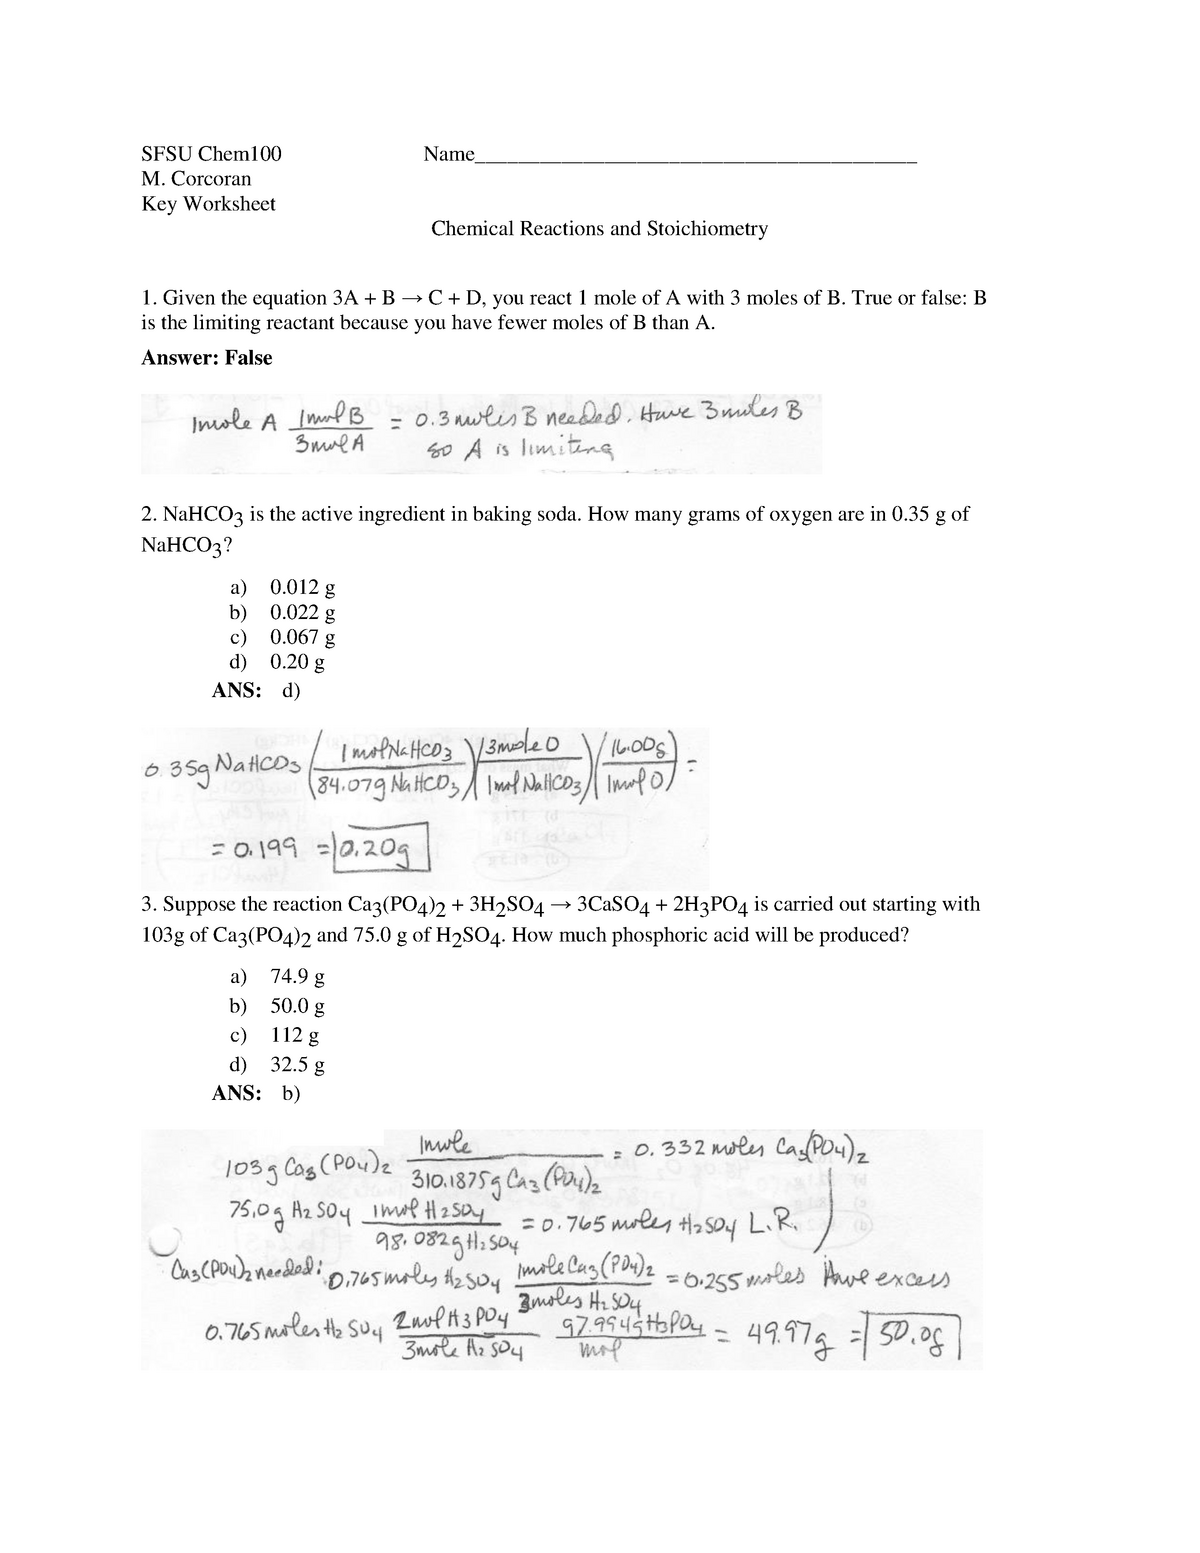 Key Worksheet - Chemical Reactions And Stoichiometry - With Pertaining To Stoichiometry Worksheet Answer Key